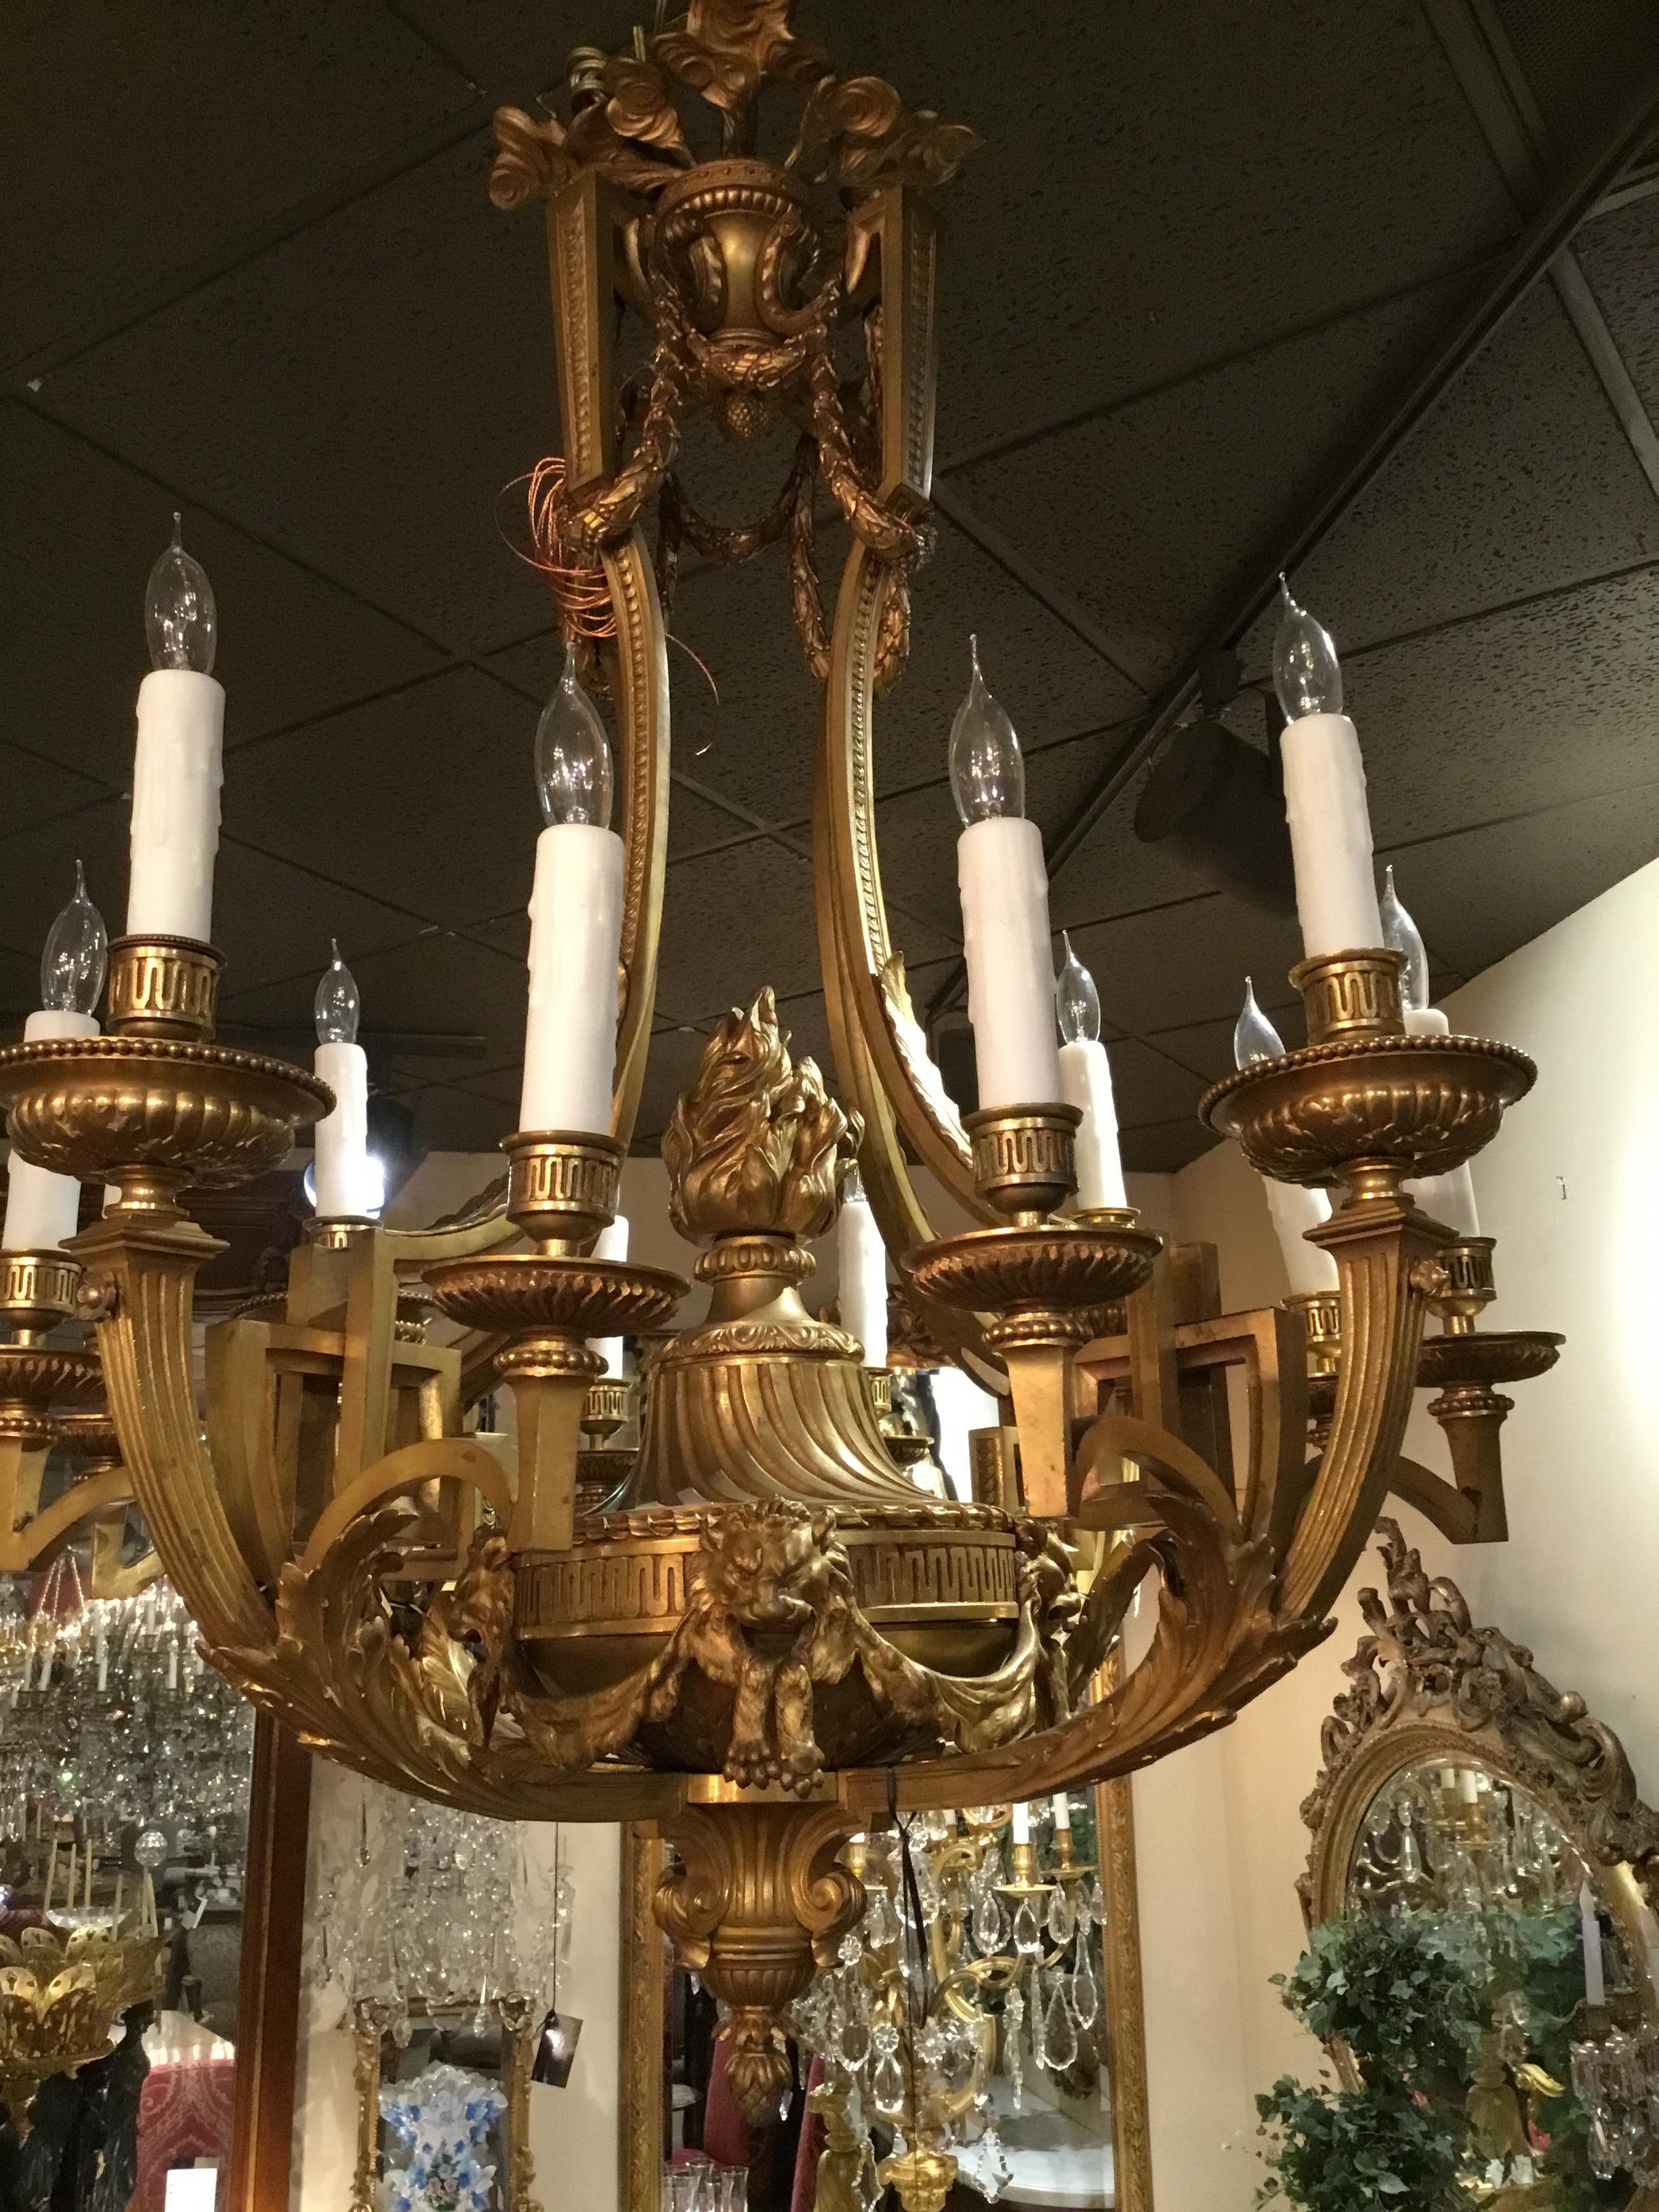 Exquisite chandelier with elongated curved lines, featuring lion masks and a center
Torch.